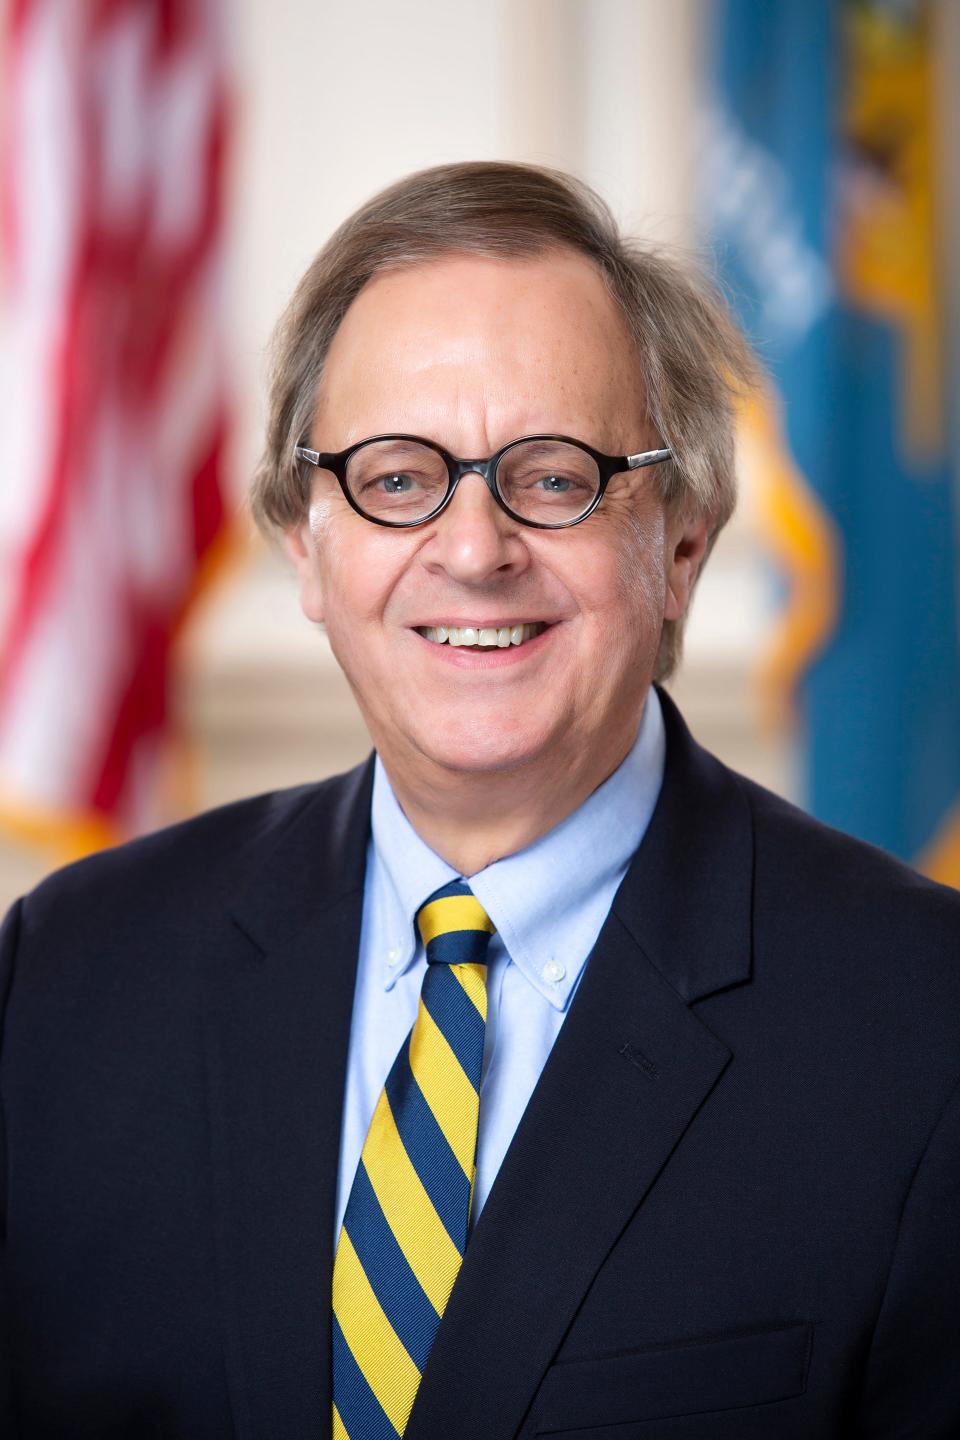 Rep. Ray Seigfried, D-Brandywine Hundred